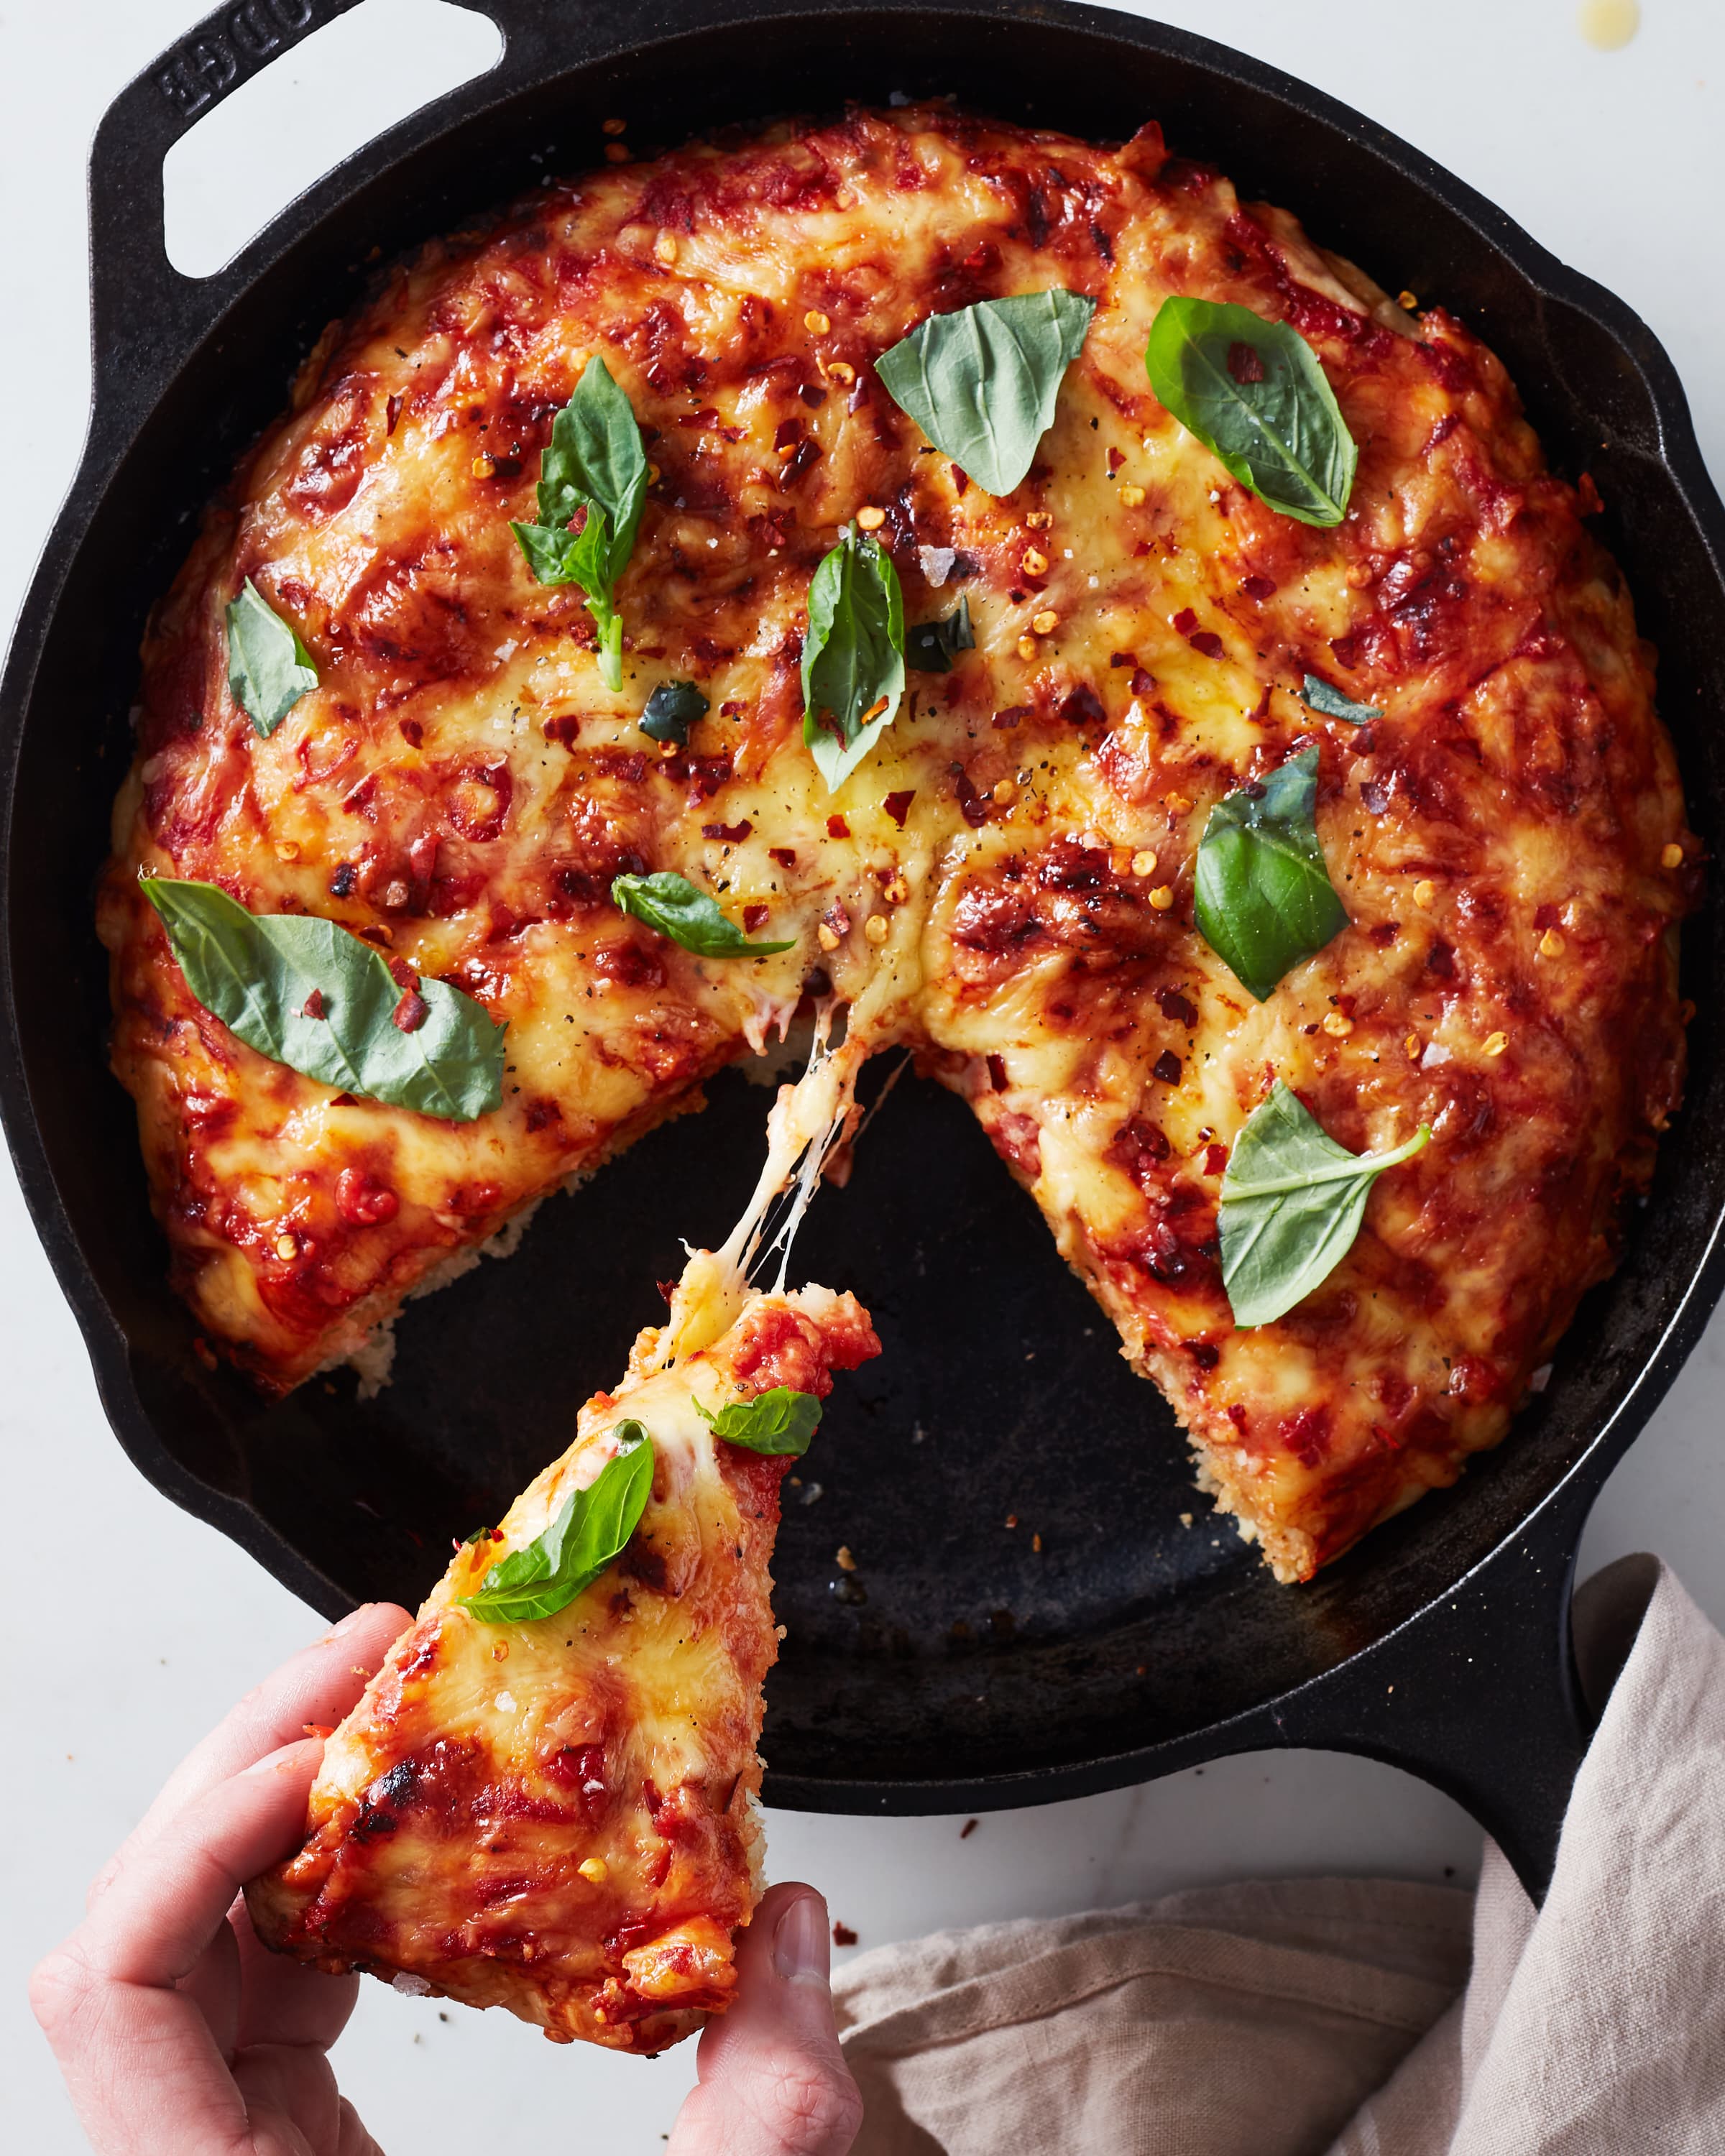 https://cdn.apartmenttherapy.info/image/upload/v1612878373/k/Photo/Recipes/2021-02-how-to-pan-pizza/2021_howto_panpizza_lead2_196.jpg